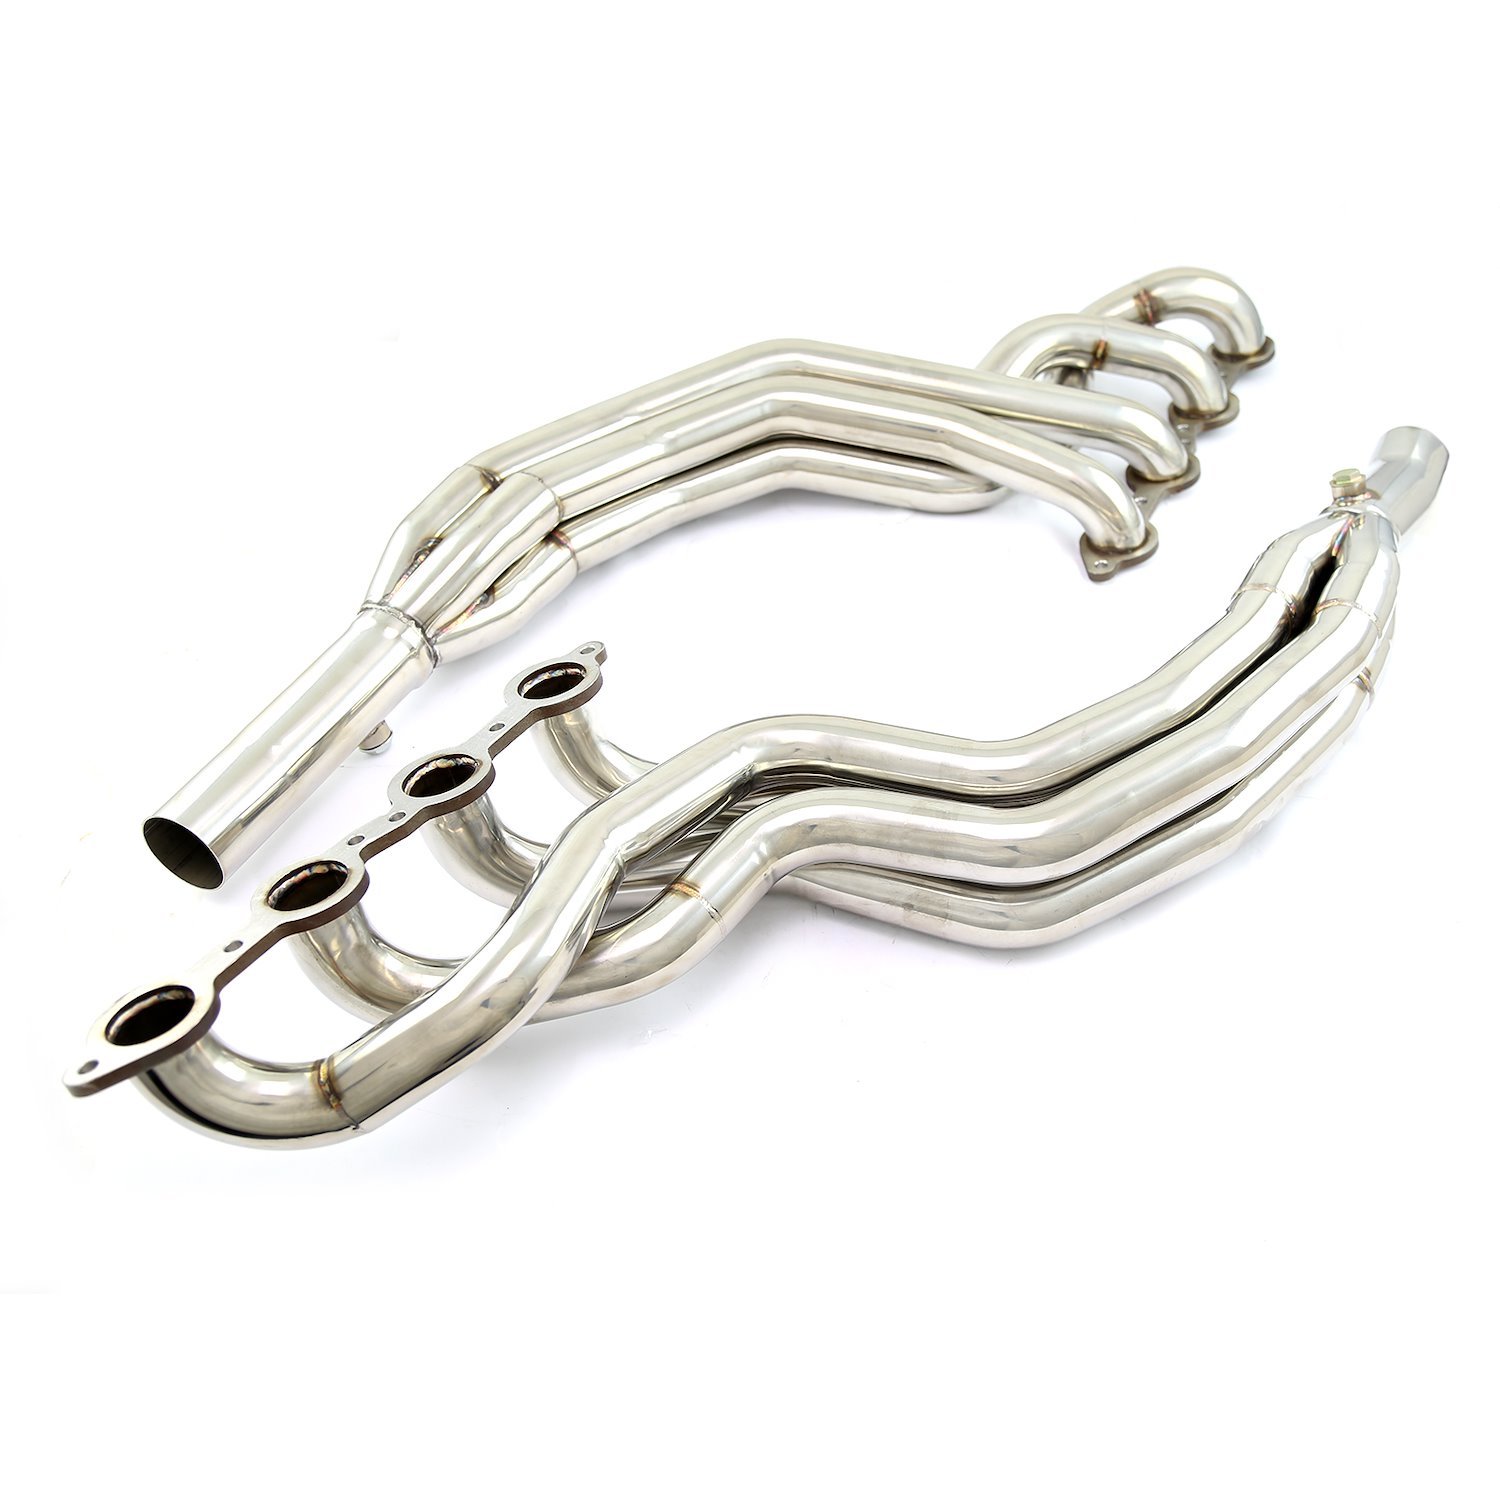 Full-Length Exhaust Headers GM LS3 for 2010-2014 Chevy Camaro